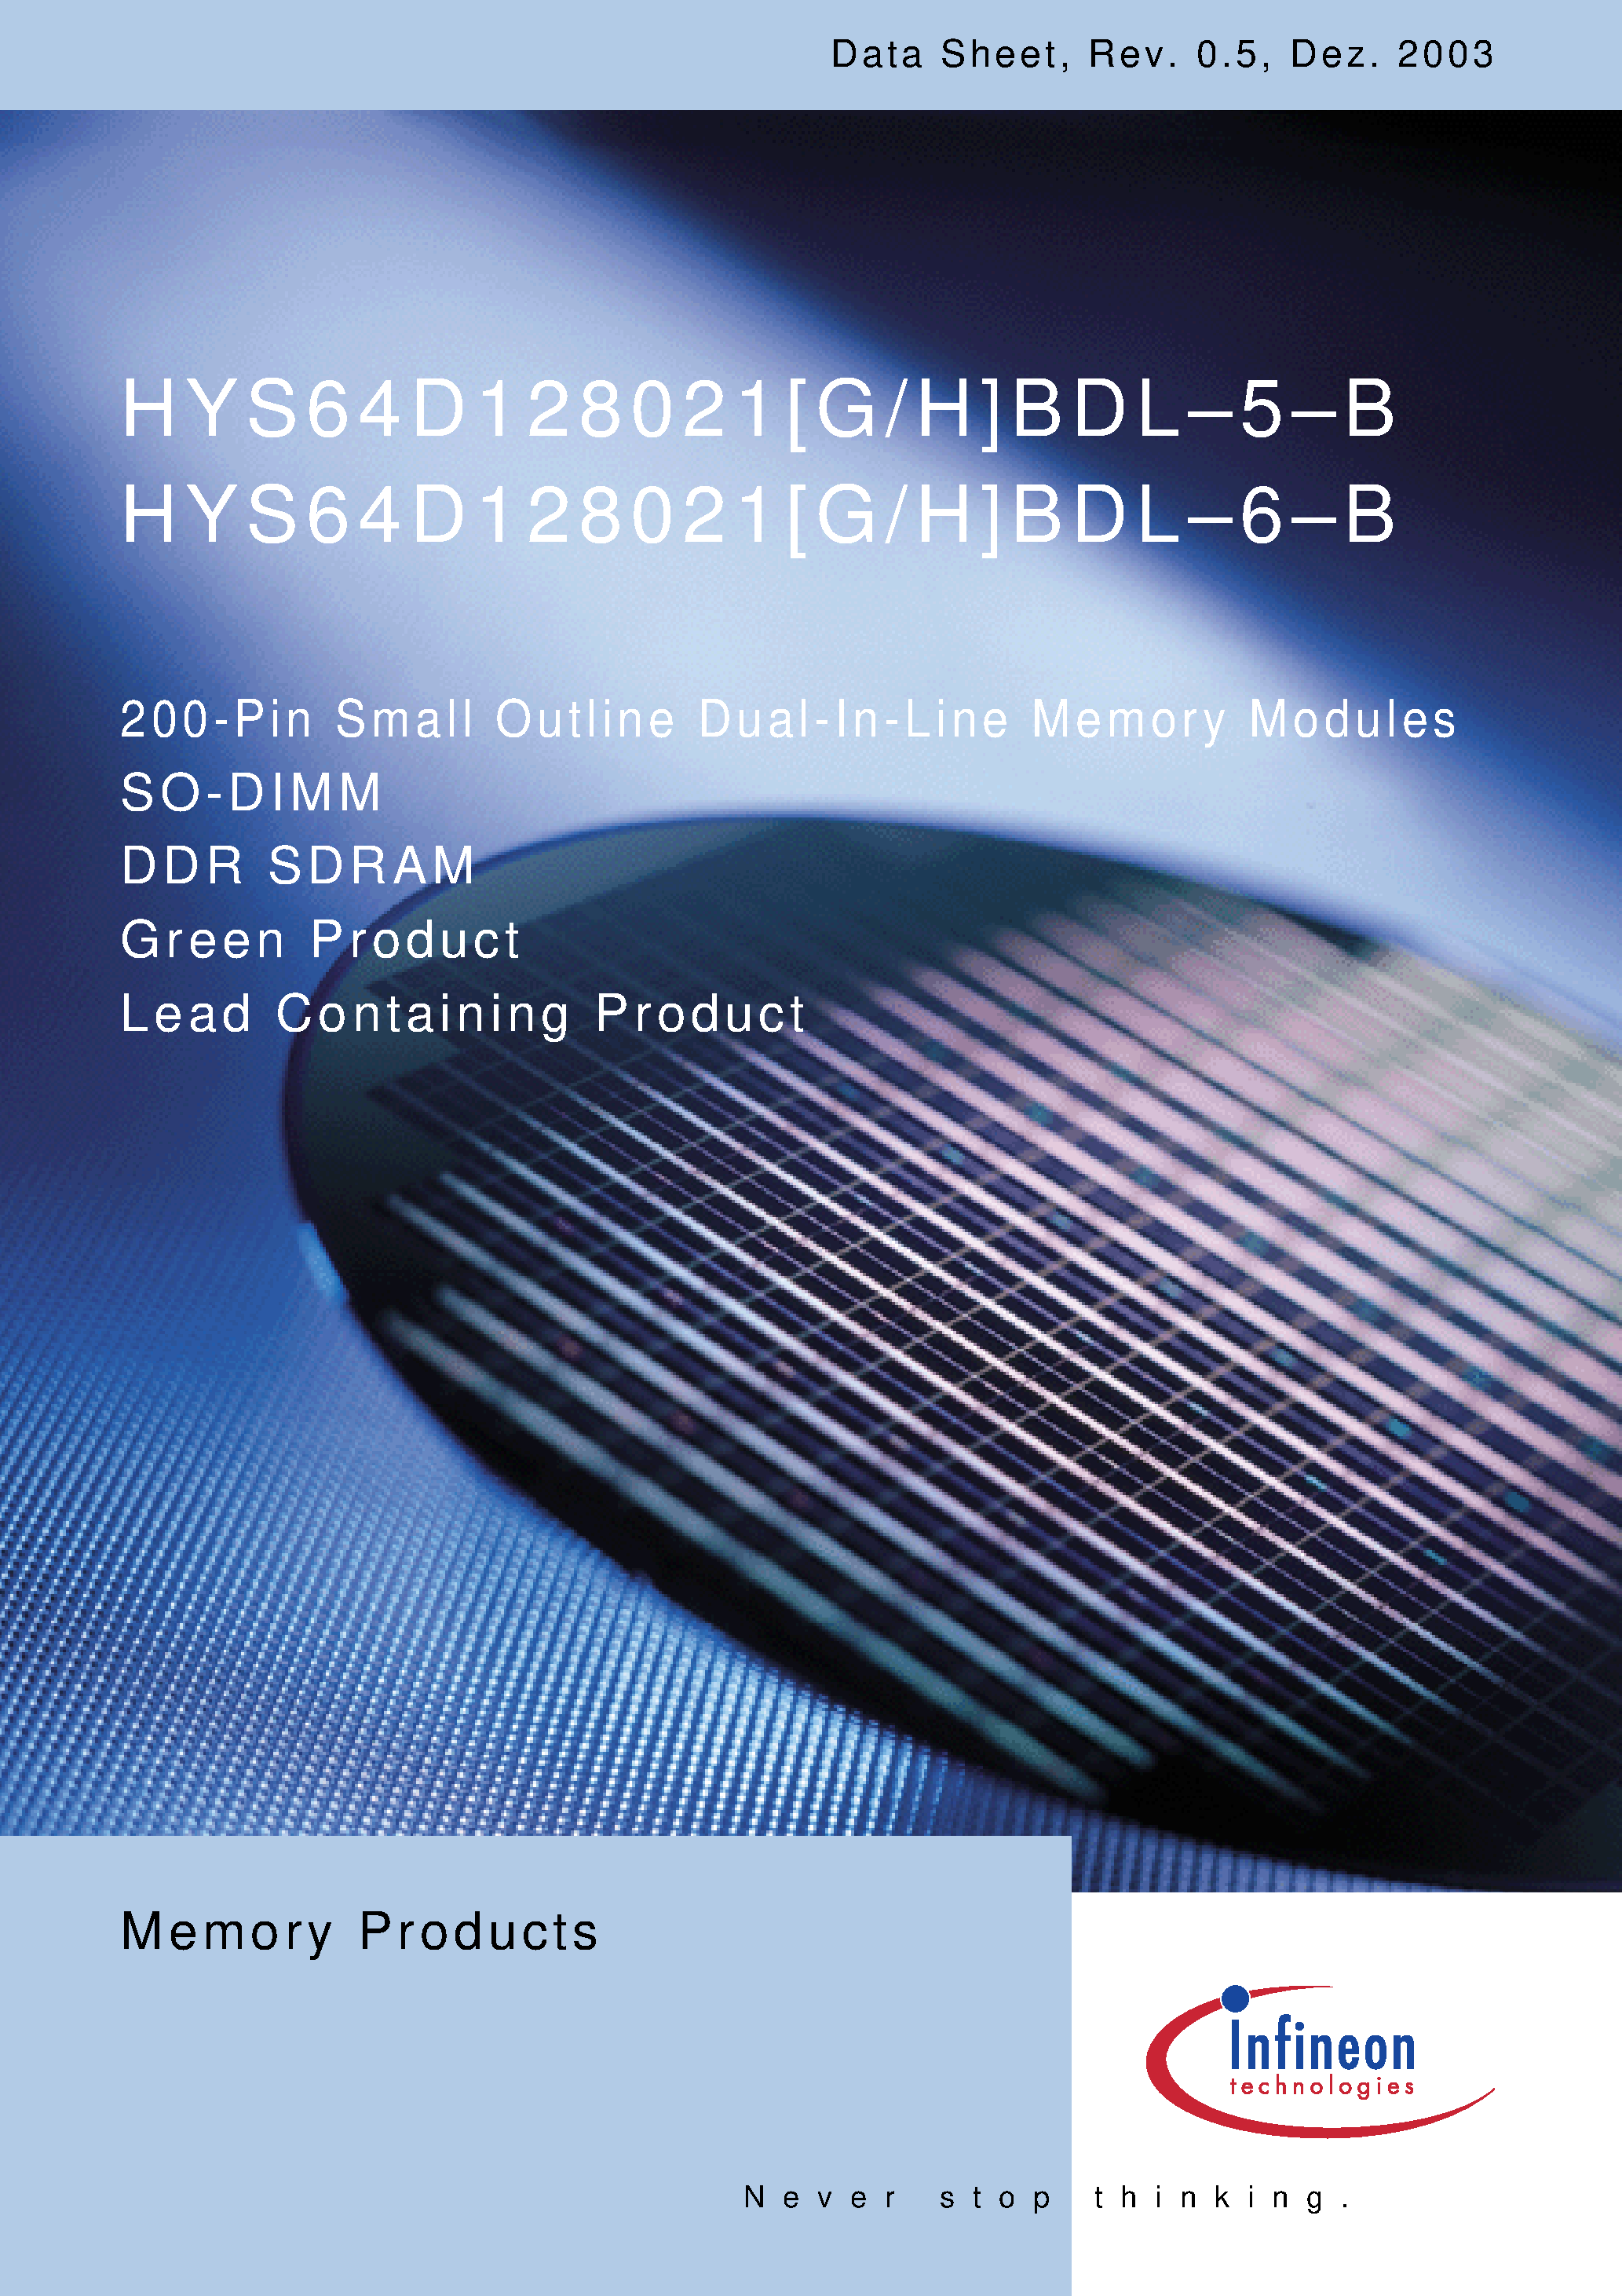 Даташит HYS64D128021GBDL-6-B - 200-Pin Small Outline Dual-In-Line Memory Modules страница 1